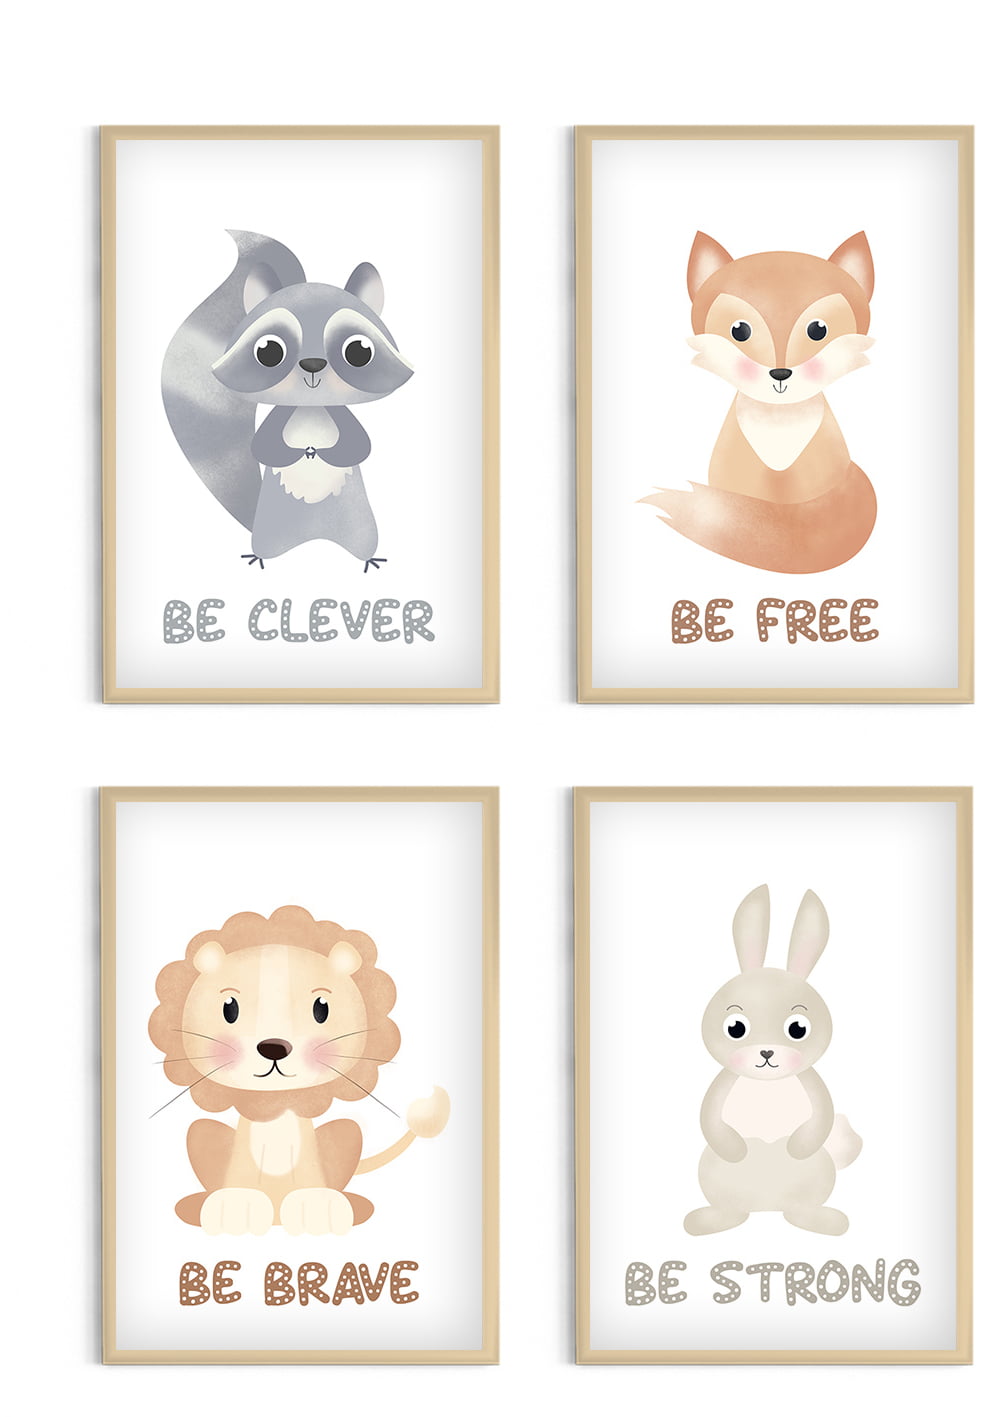 4 Pcs Photo Frames with Cute Watercolor Deer Animals Wall Art Prints Gallery Kit Wall Art Decor for Kids Room Girls playroom ArtbyHannah 10x10 Inch Picture Frames Framed Nursery Wall Decor Nursery Room Or Home Wall Hanging Decoration 